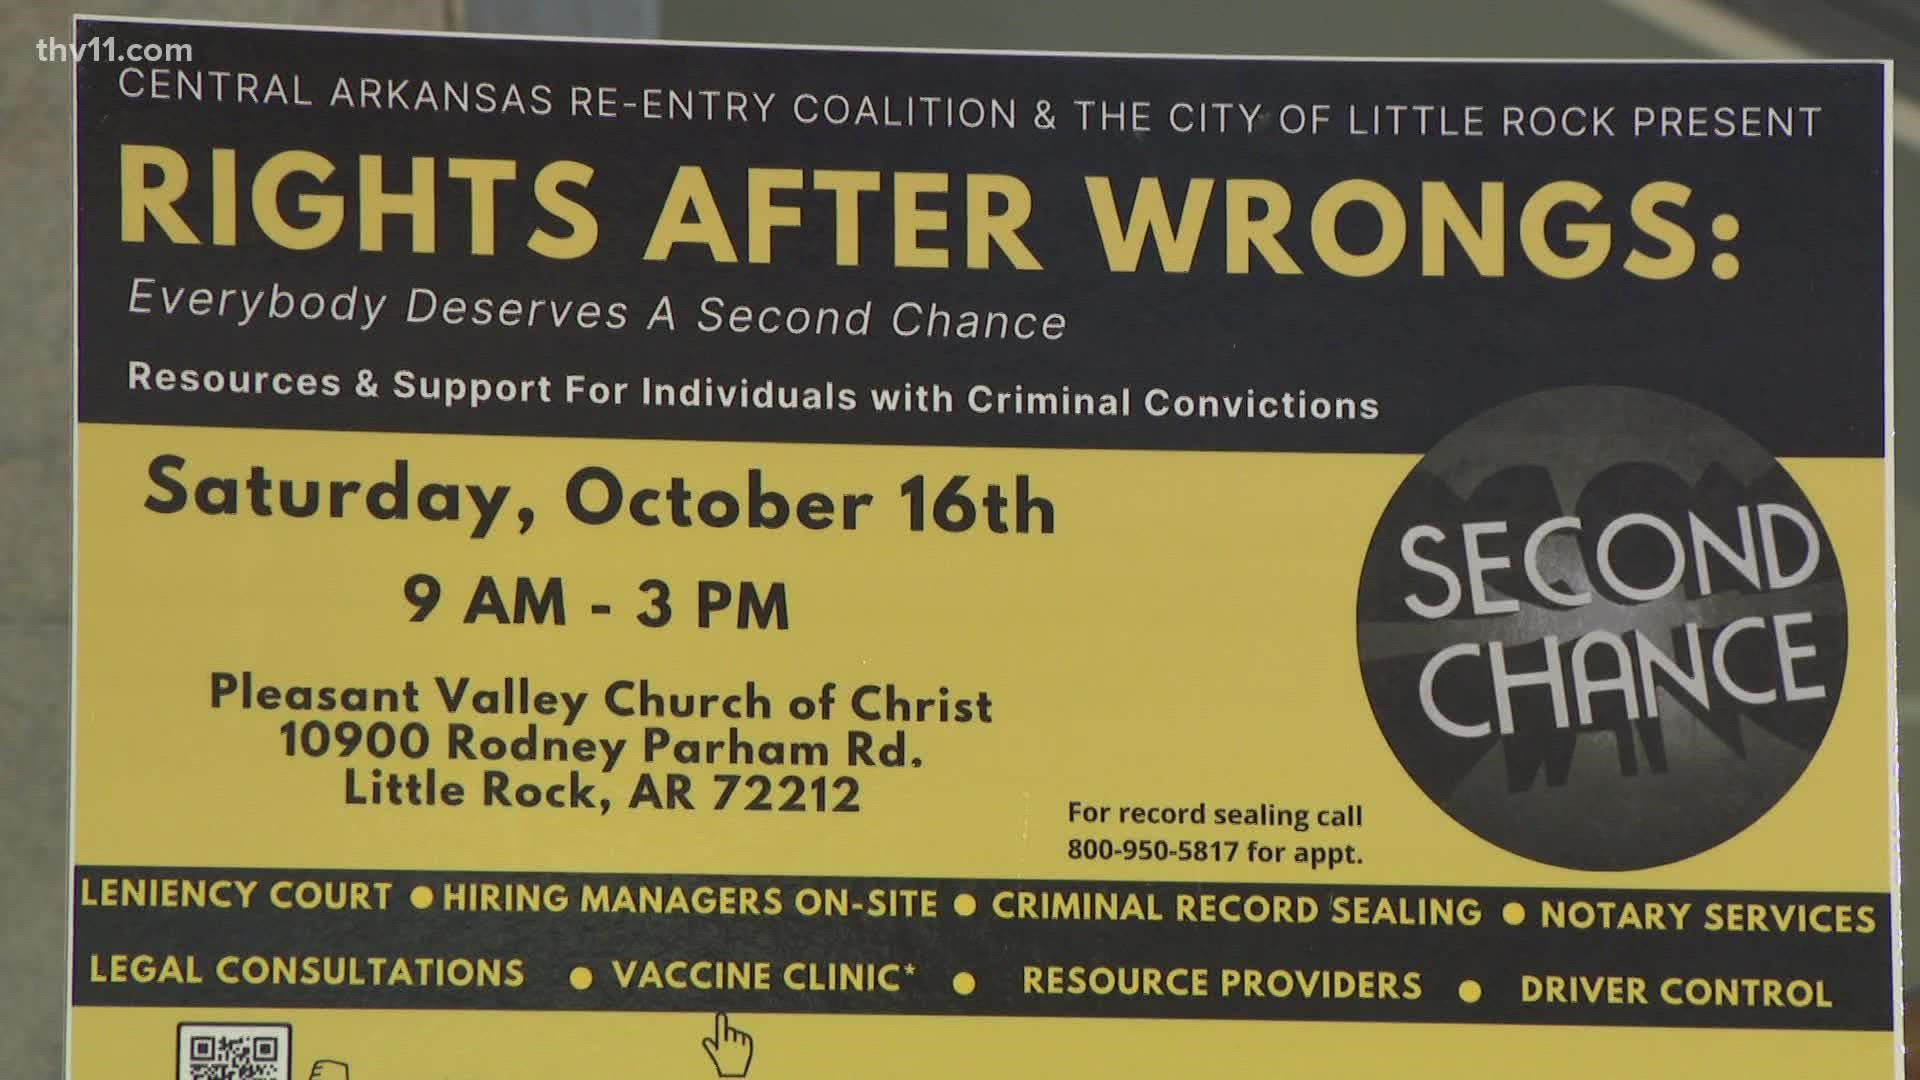 The City of Little Rock will host the Rights after Wrongs event this weekend.